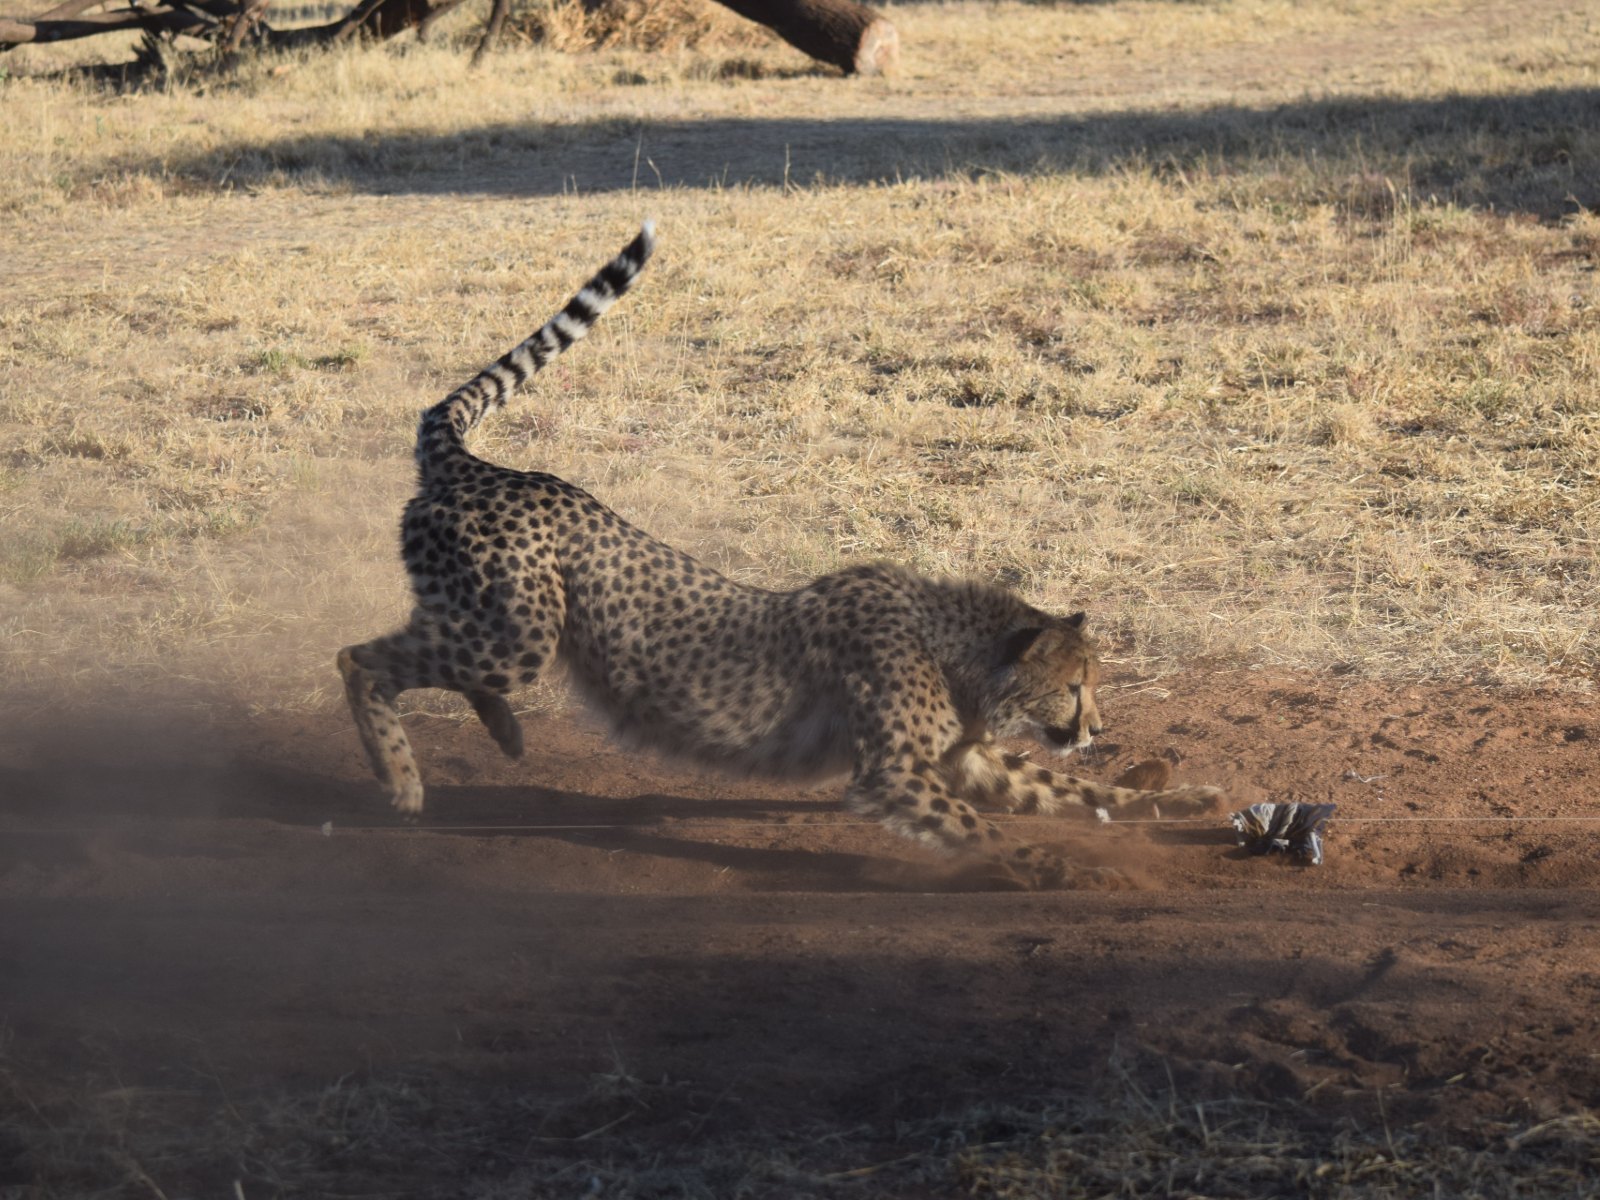 A cheetah chasing a toy around.